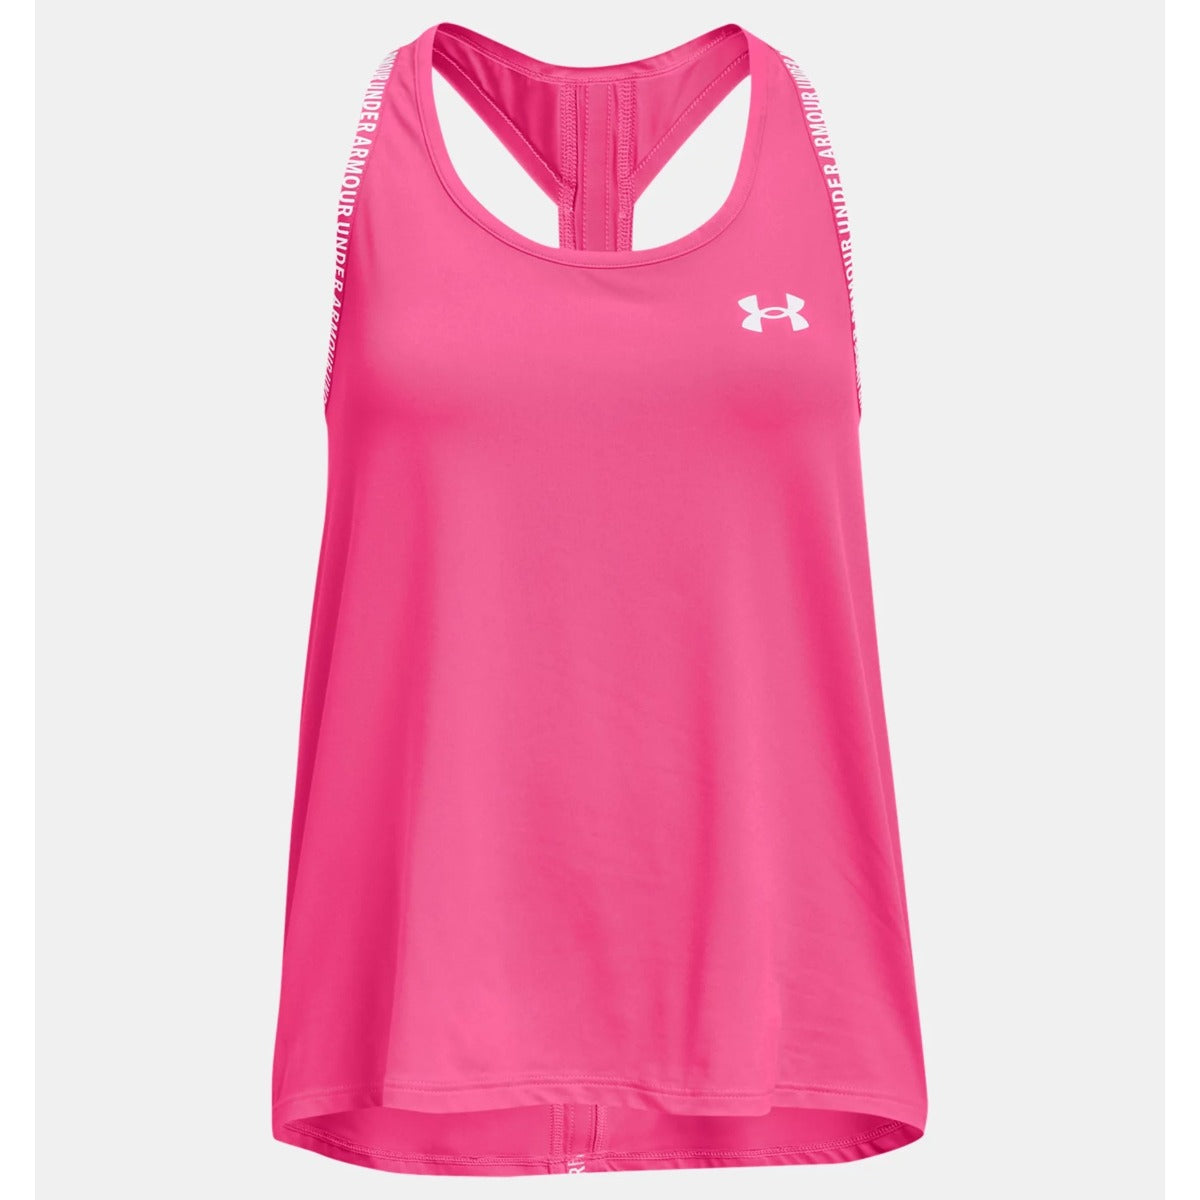 Under Armour Knockout Tank Top Girls (Pink 695)